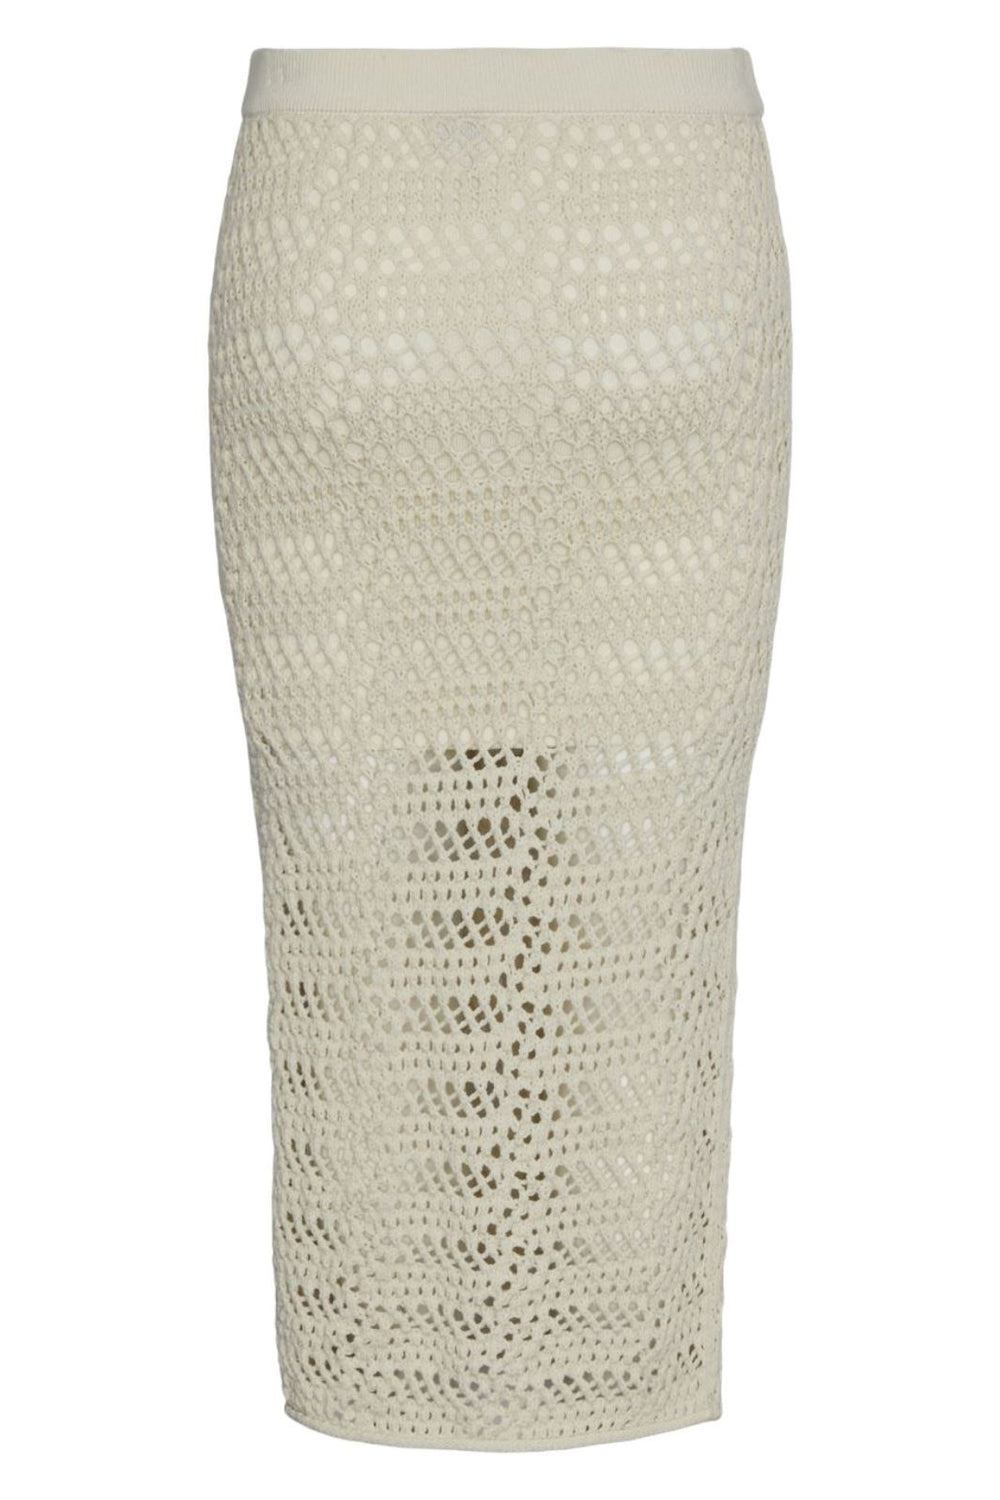 Pieces - Pcaia Long Knit Skirt - 4508282 Birch Nederdele 